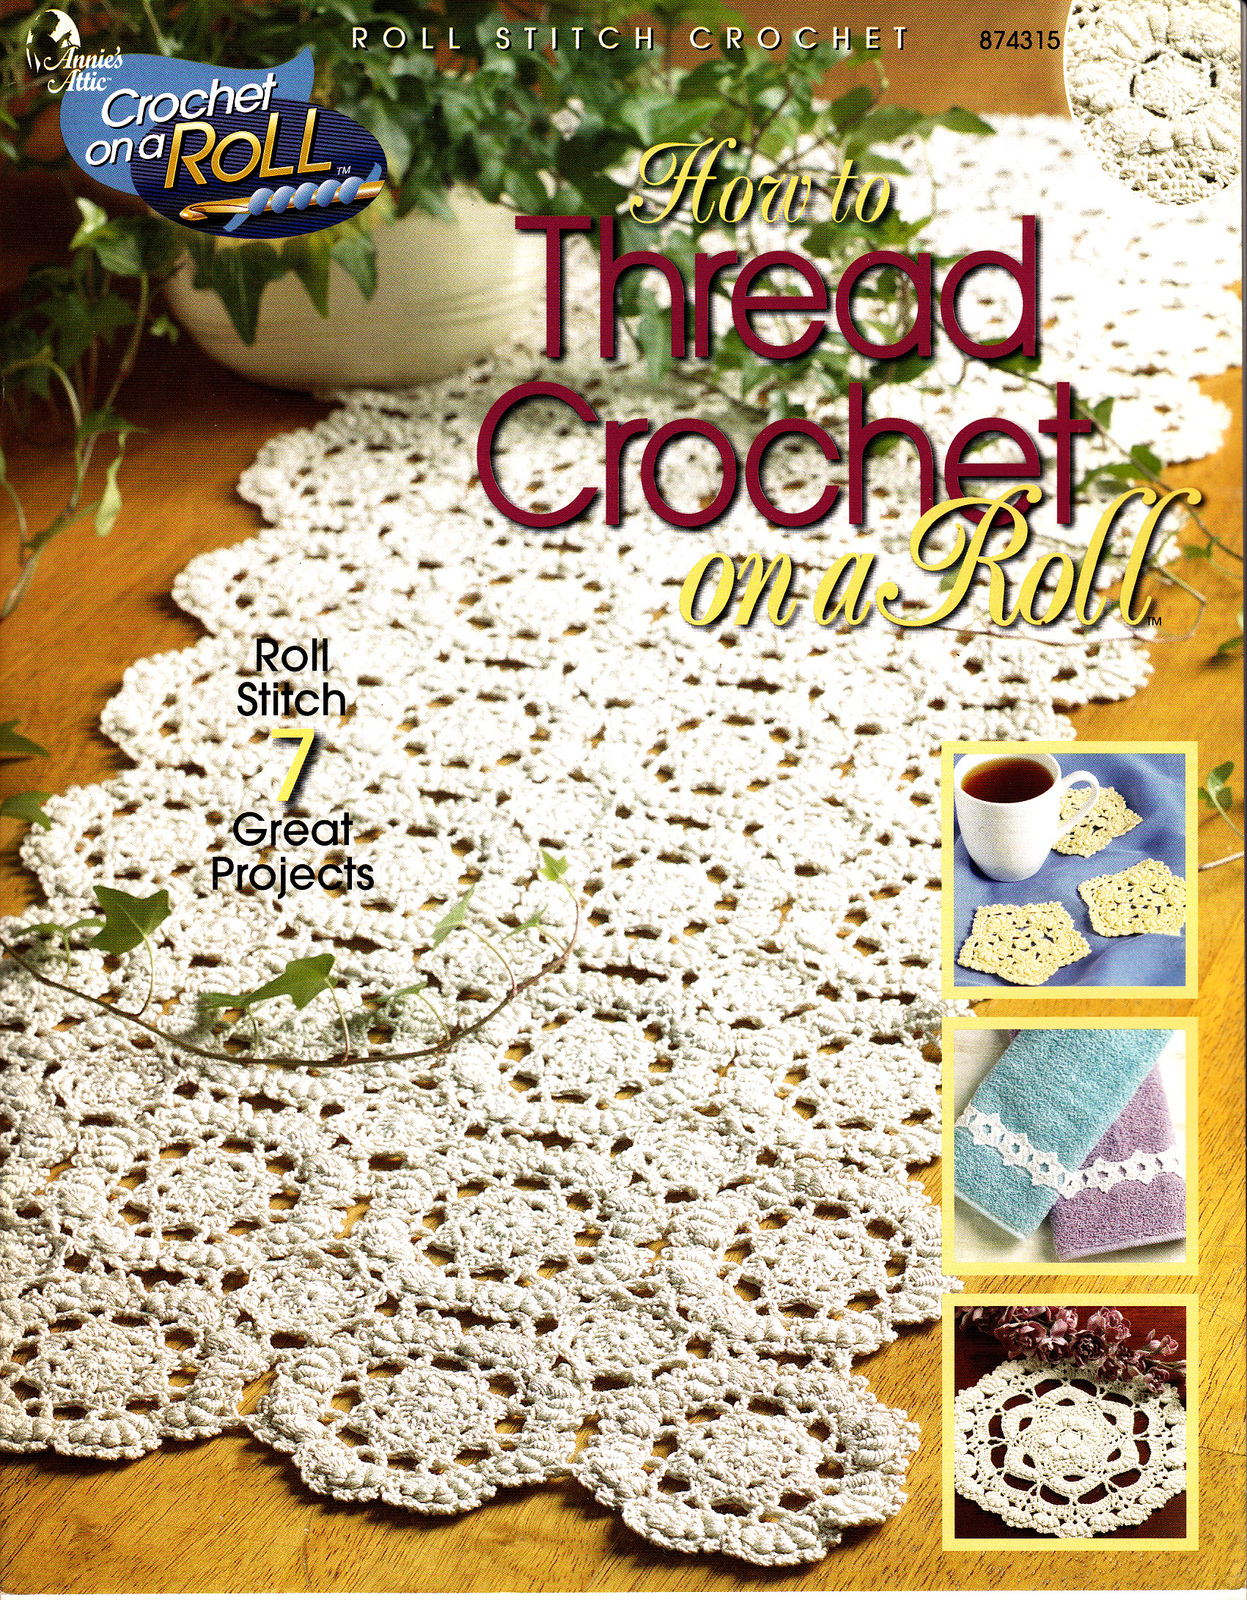 How to Thread Crochet on a Roll (2004,Crochet Paperback) - $5.00